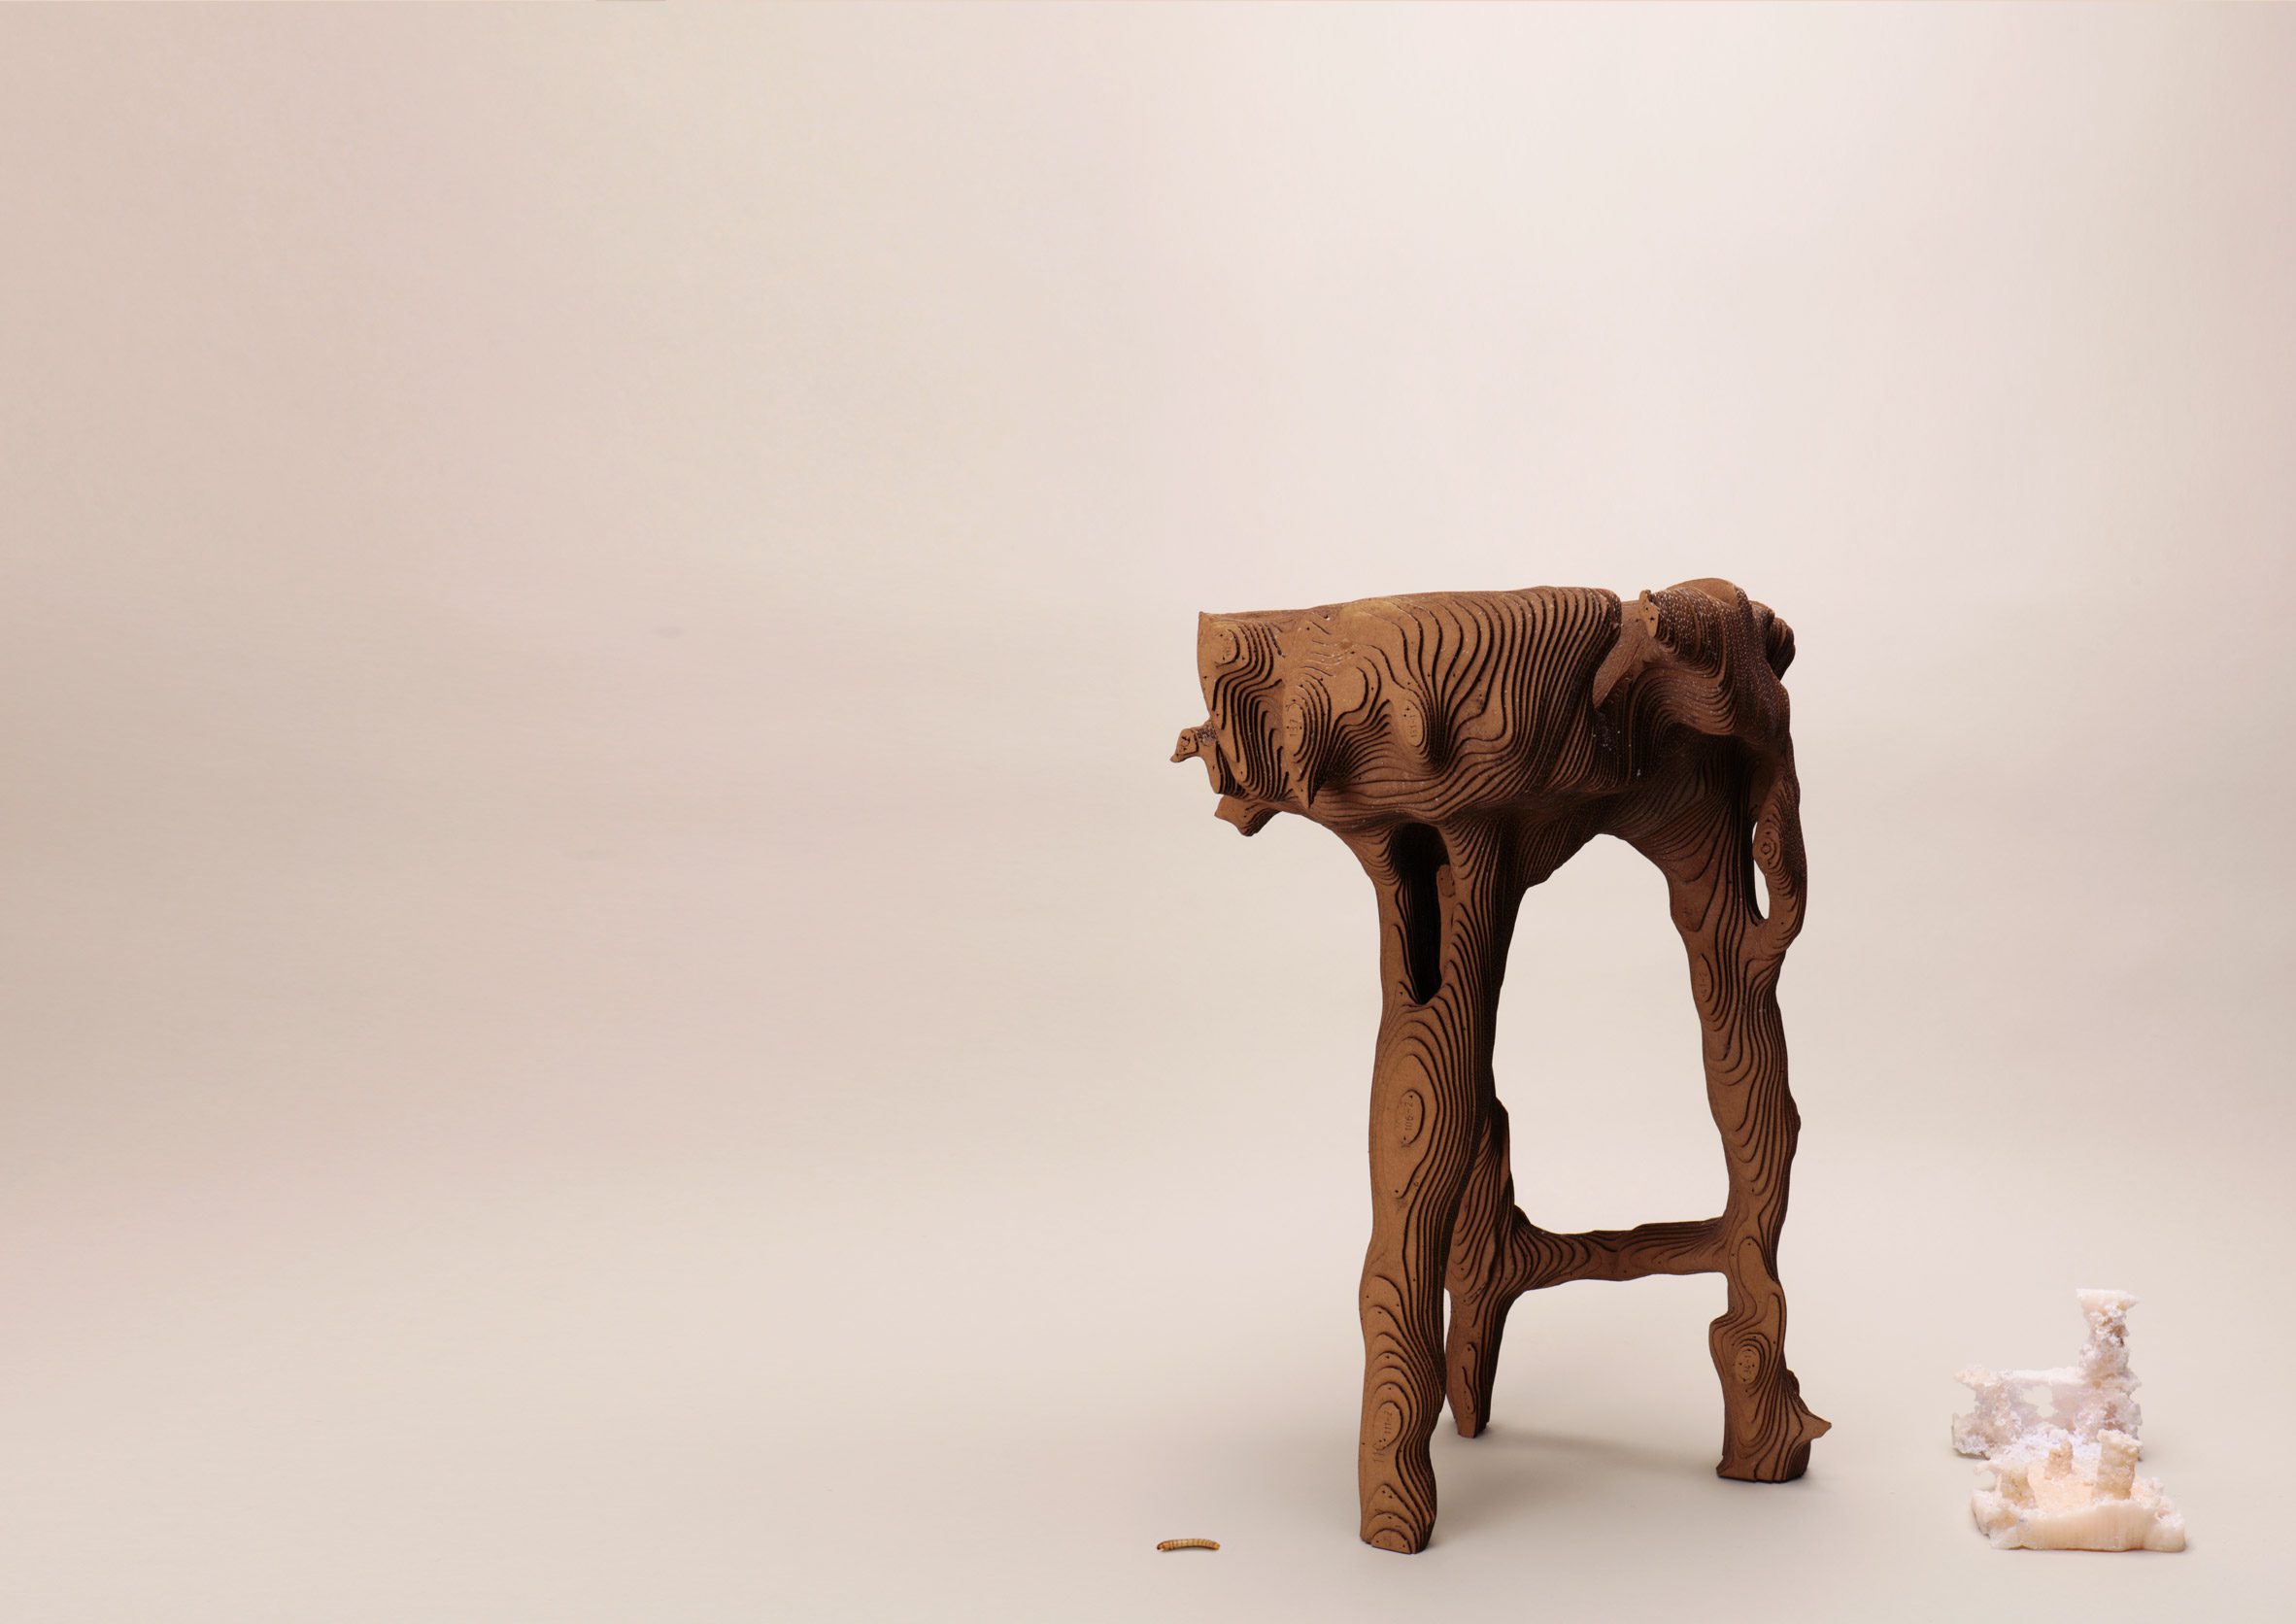 Photo of William Eliot's Digested Objects stool prototype, made of slices of brown cardboard glued together